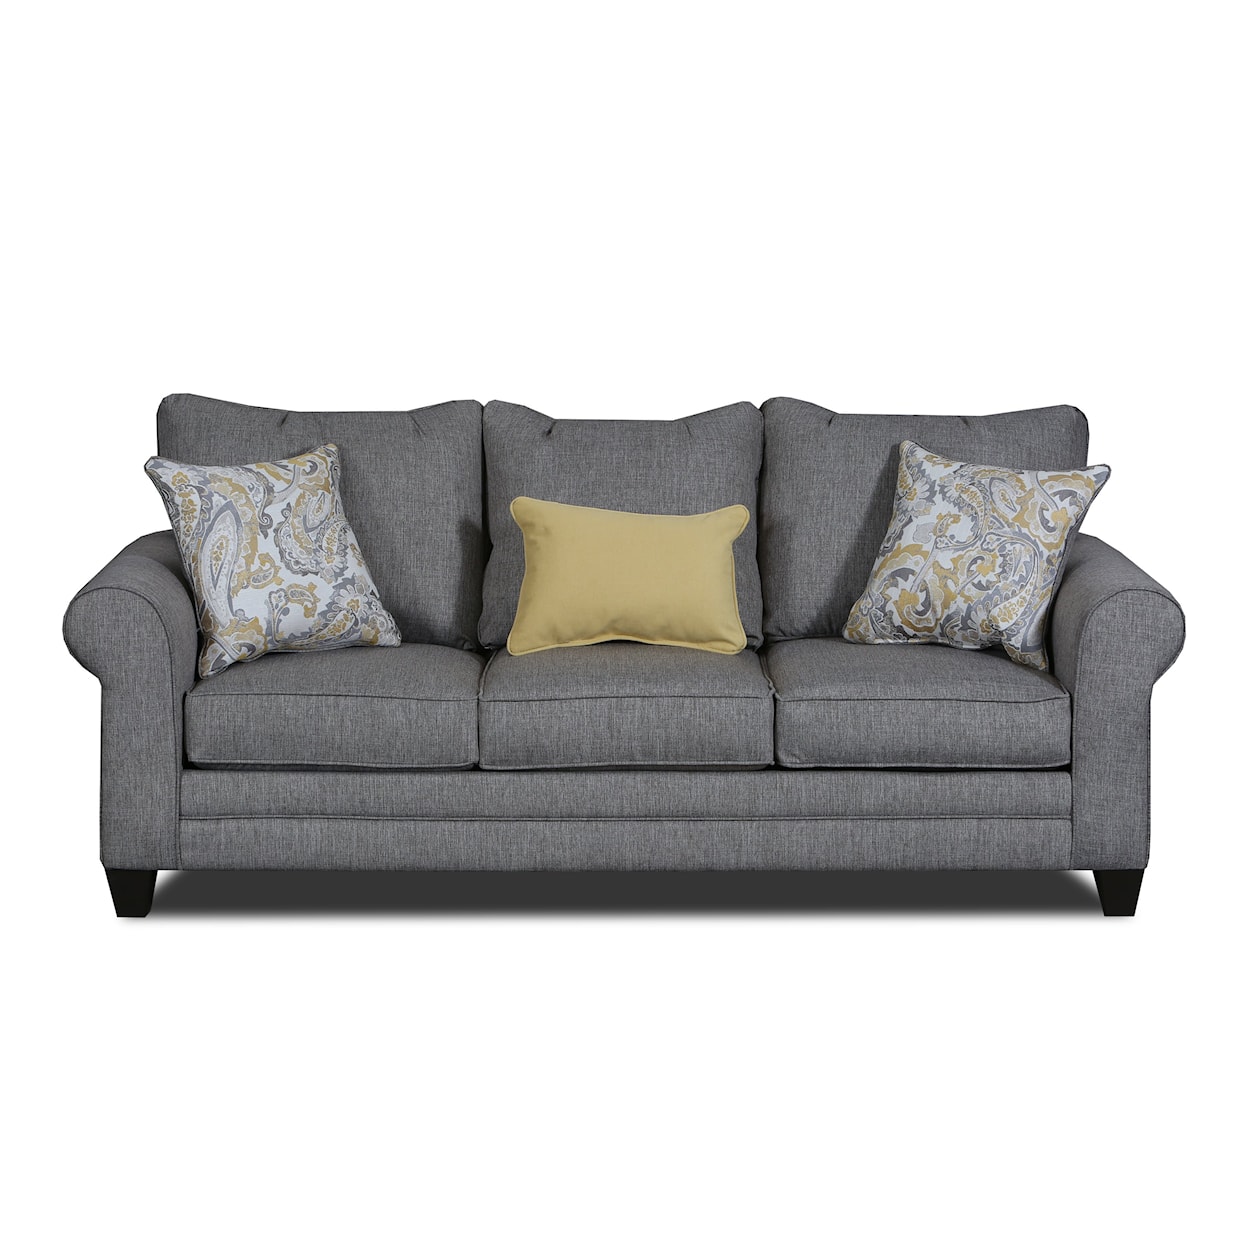 Magnolia Upholstery Design 4200 Sly Tweed Sofa and Loveseat